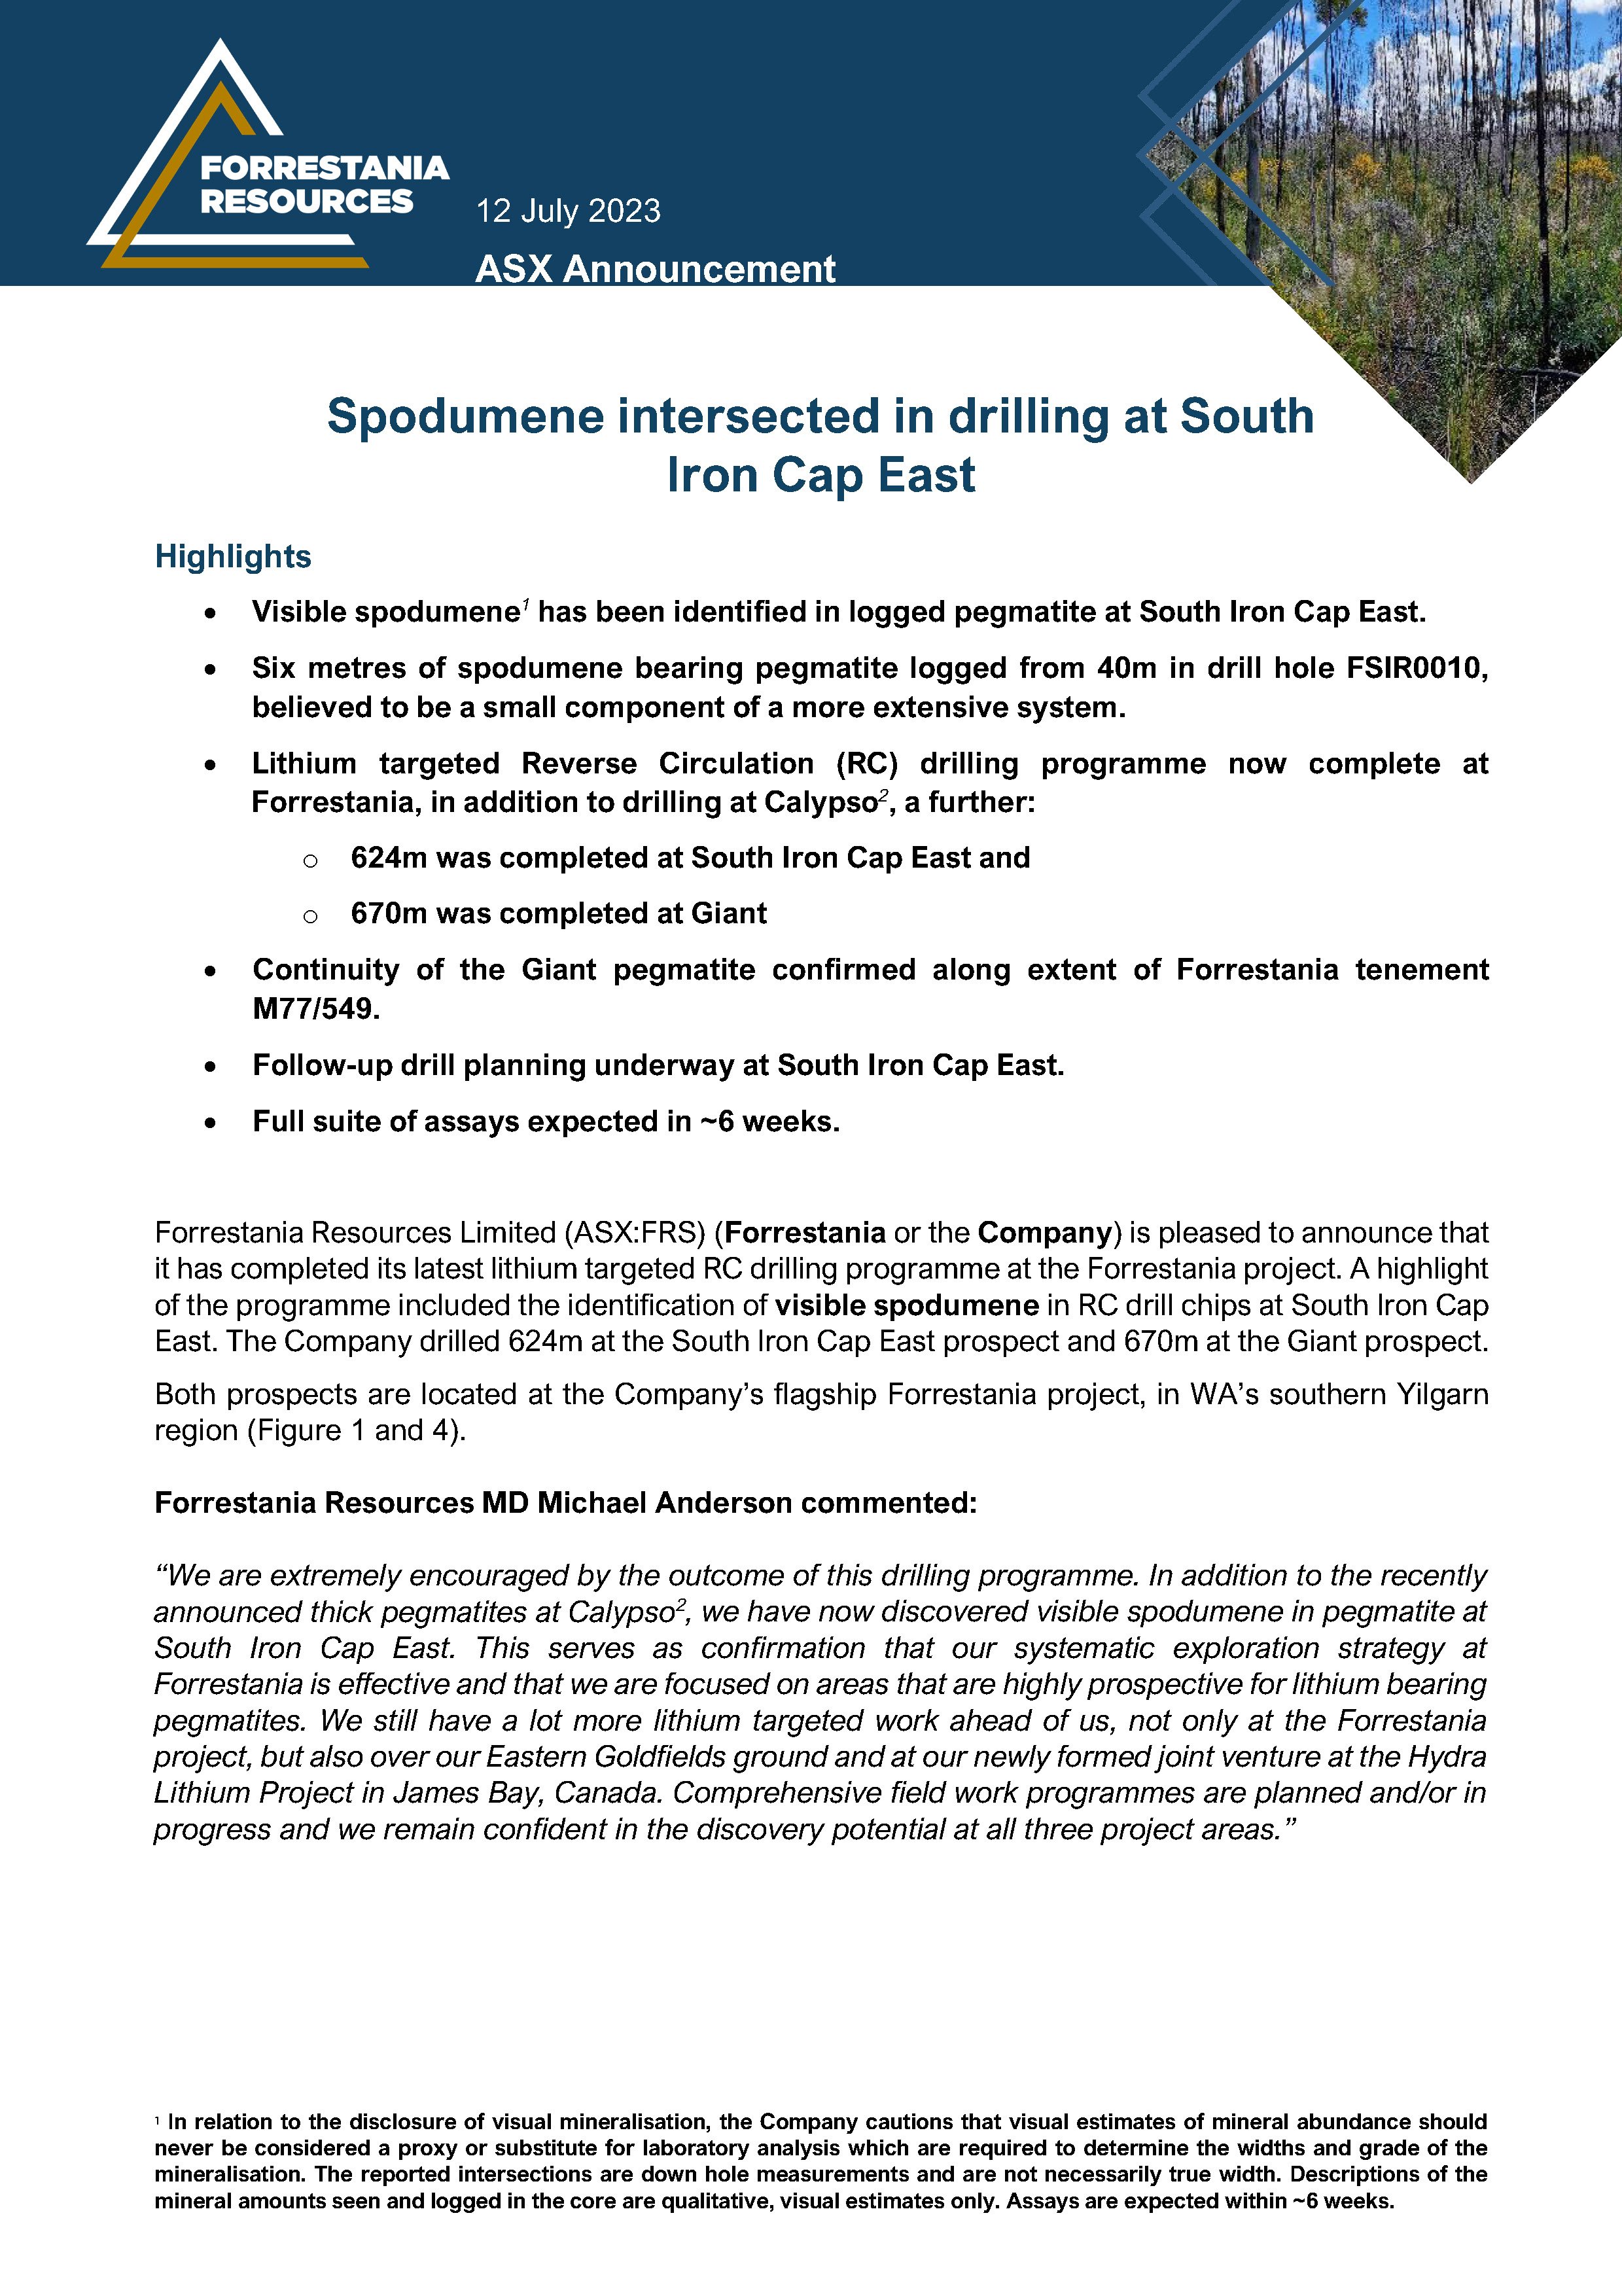 Spodumene intersected in drilling at South Iron Cap East